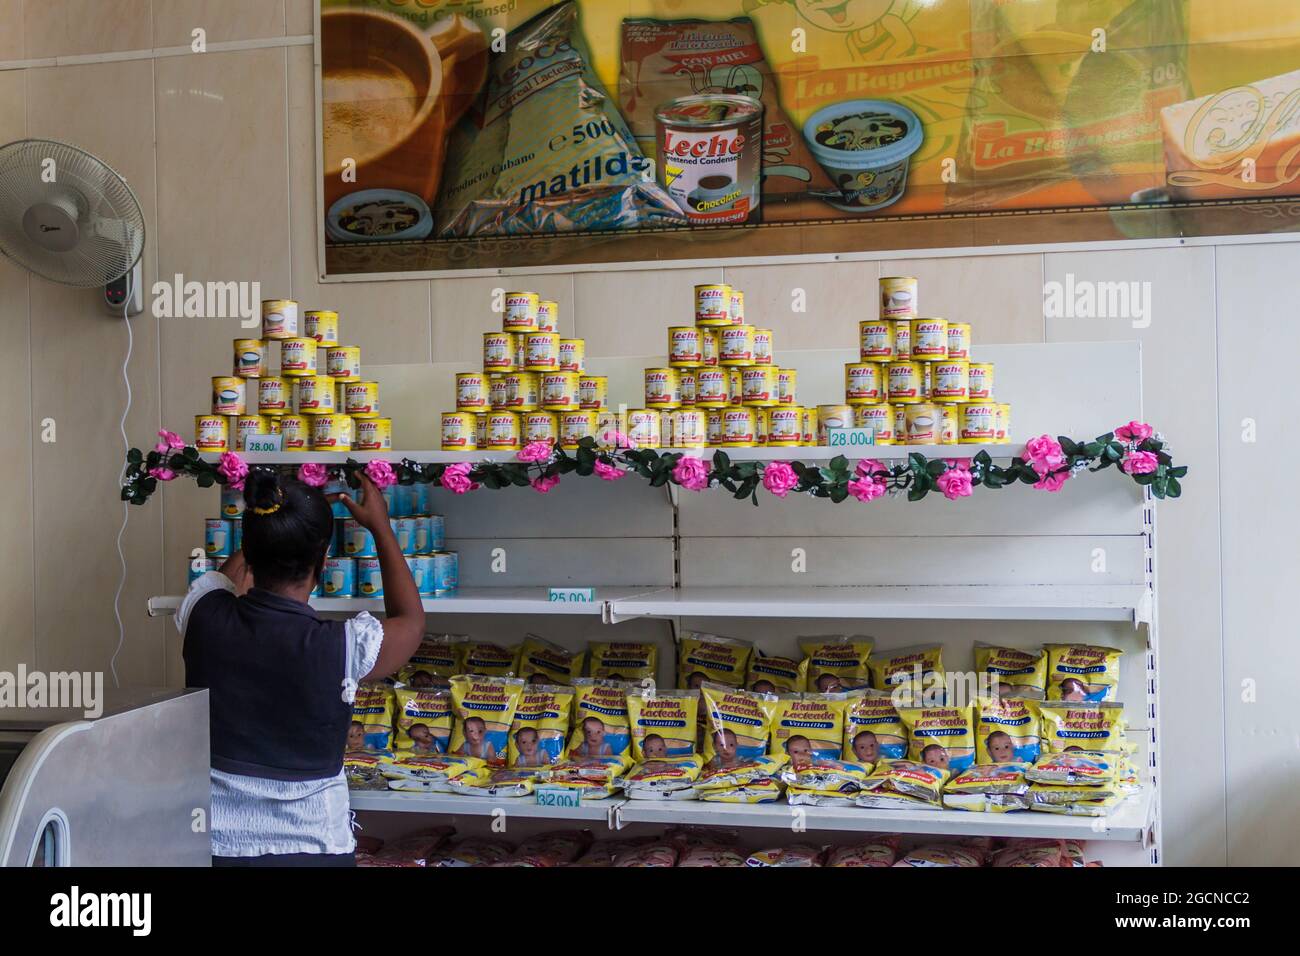 BAYAMO,  CUBA - JAN 30, 2016: Very limited selection of the merchandise in a local store  in Bayamo, Cuba Stock Photo